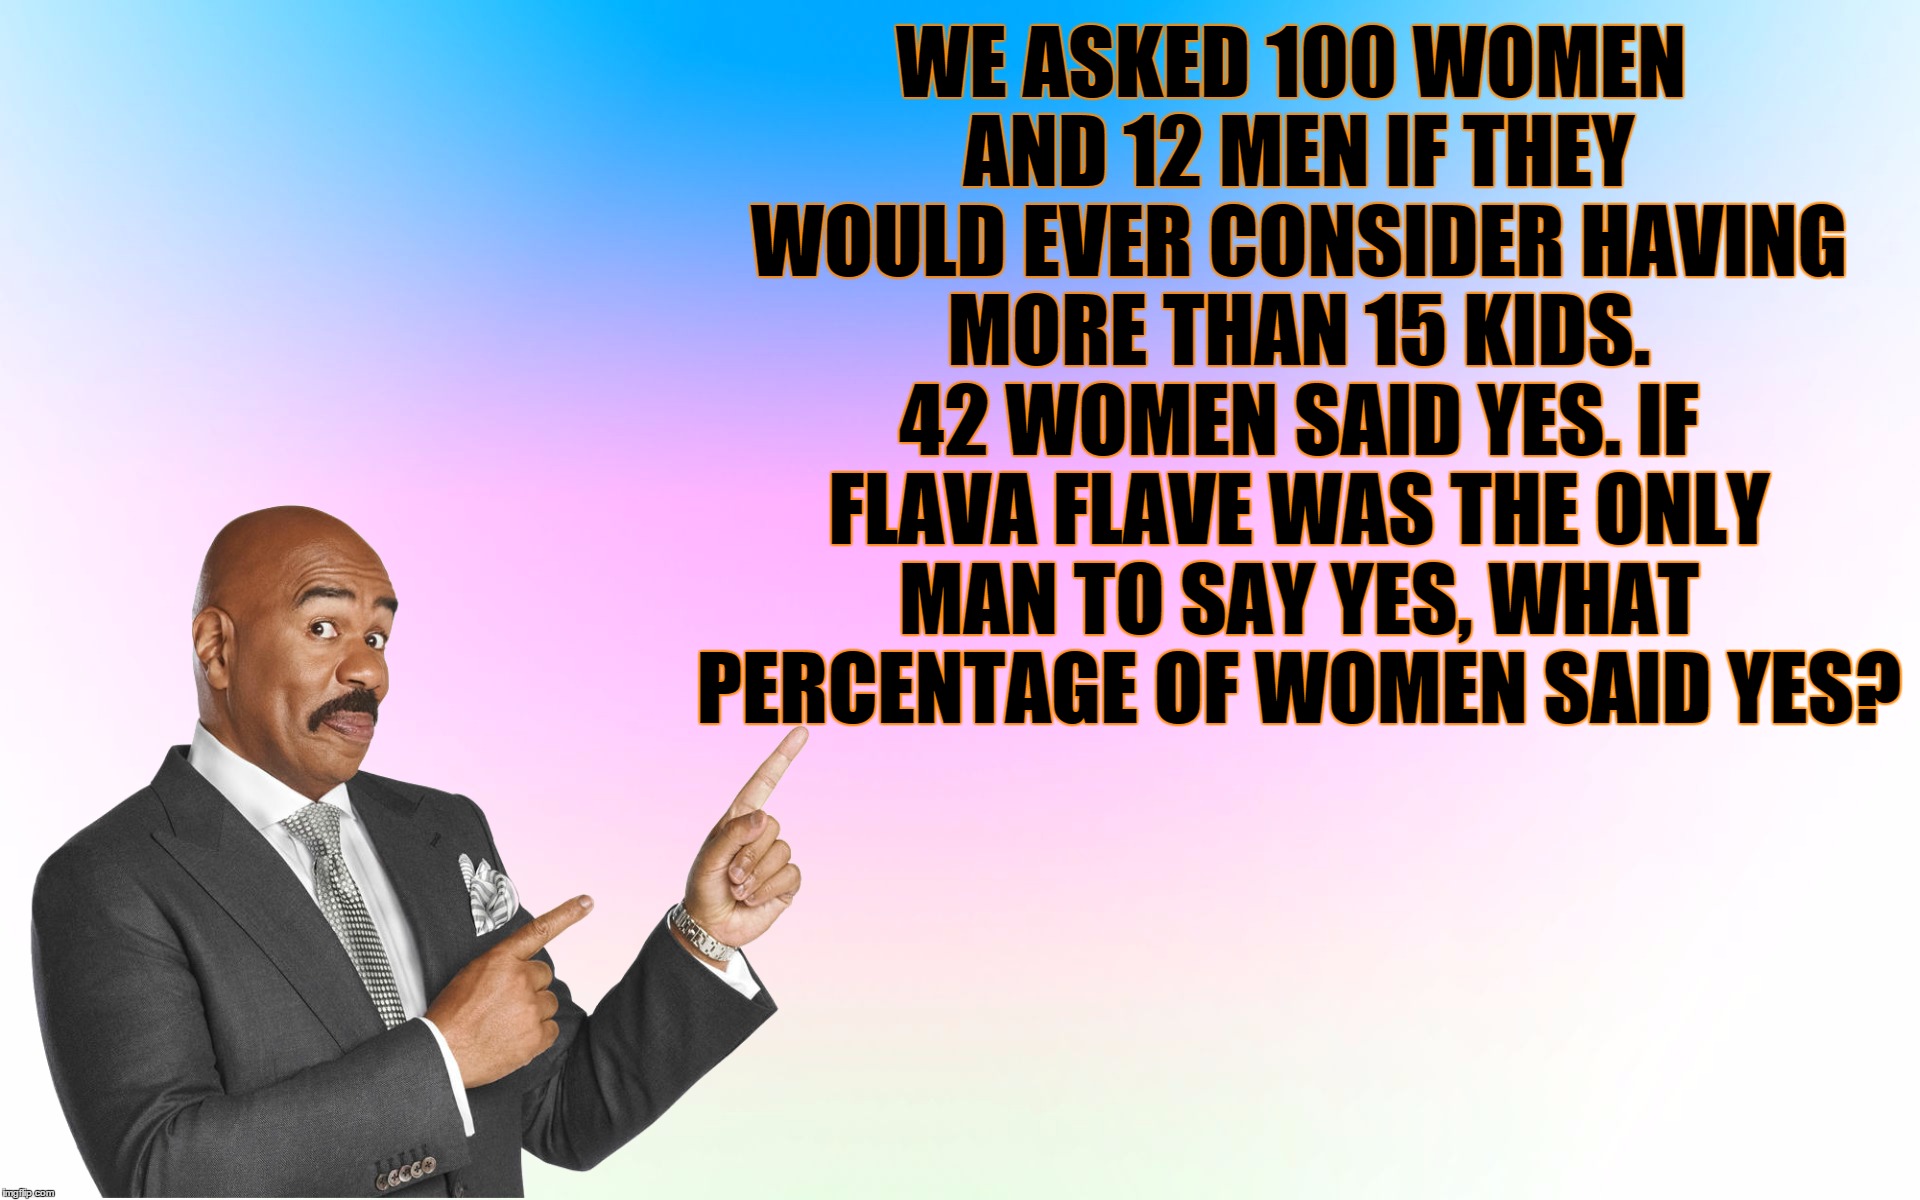 Popping The Ultimate Question Of The Universe | WE ASKED 100 WOMEN AND 12 MEN IF THEY WOULD EVER CONSIDER HAVING MORE THAN 15 KIDS. 42 WOMEN SAID YES. IF FLAVA FLAVE WAS THE ONLY MAN TO SAY YES, WHAT PERCENTAGE OF WOMEN SAID YES? | image tagged in steve harvey,family feud,riddles and brainteasers,math,maths,questions | made w/ Imgflip meme maker